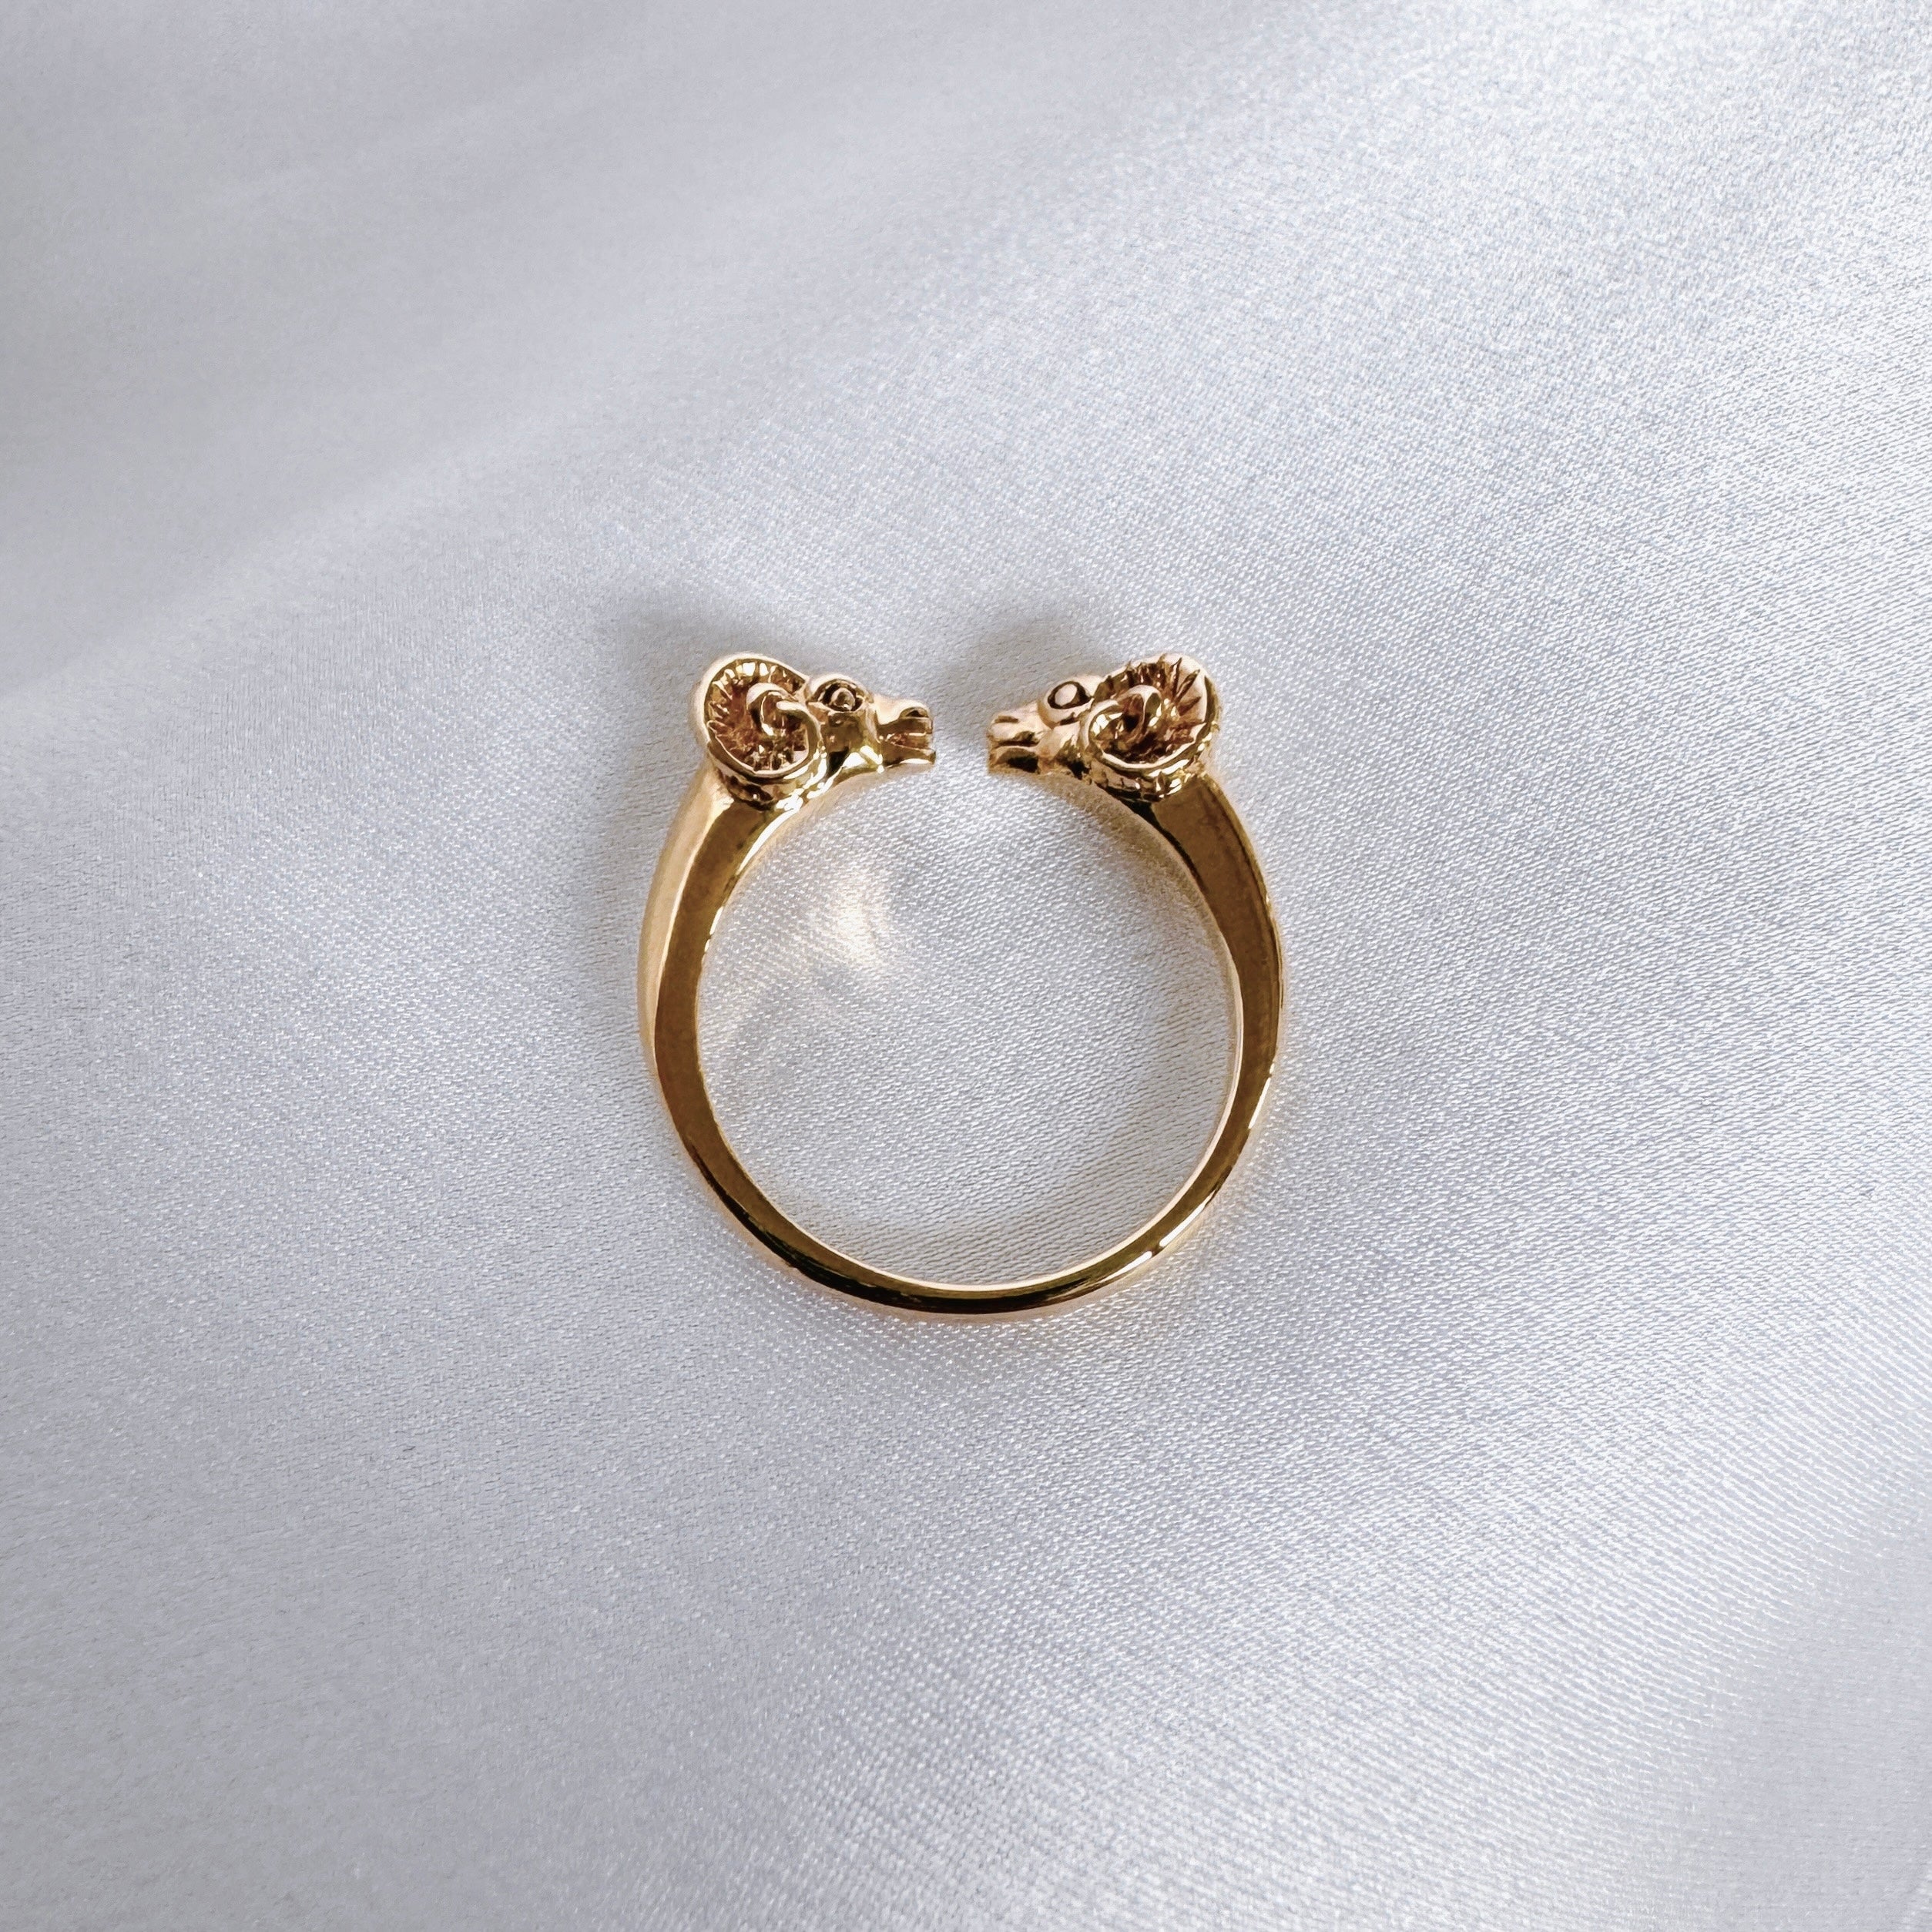 Gold-plated “Aries” ring